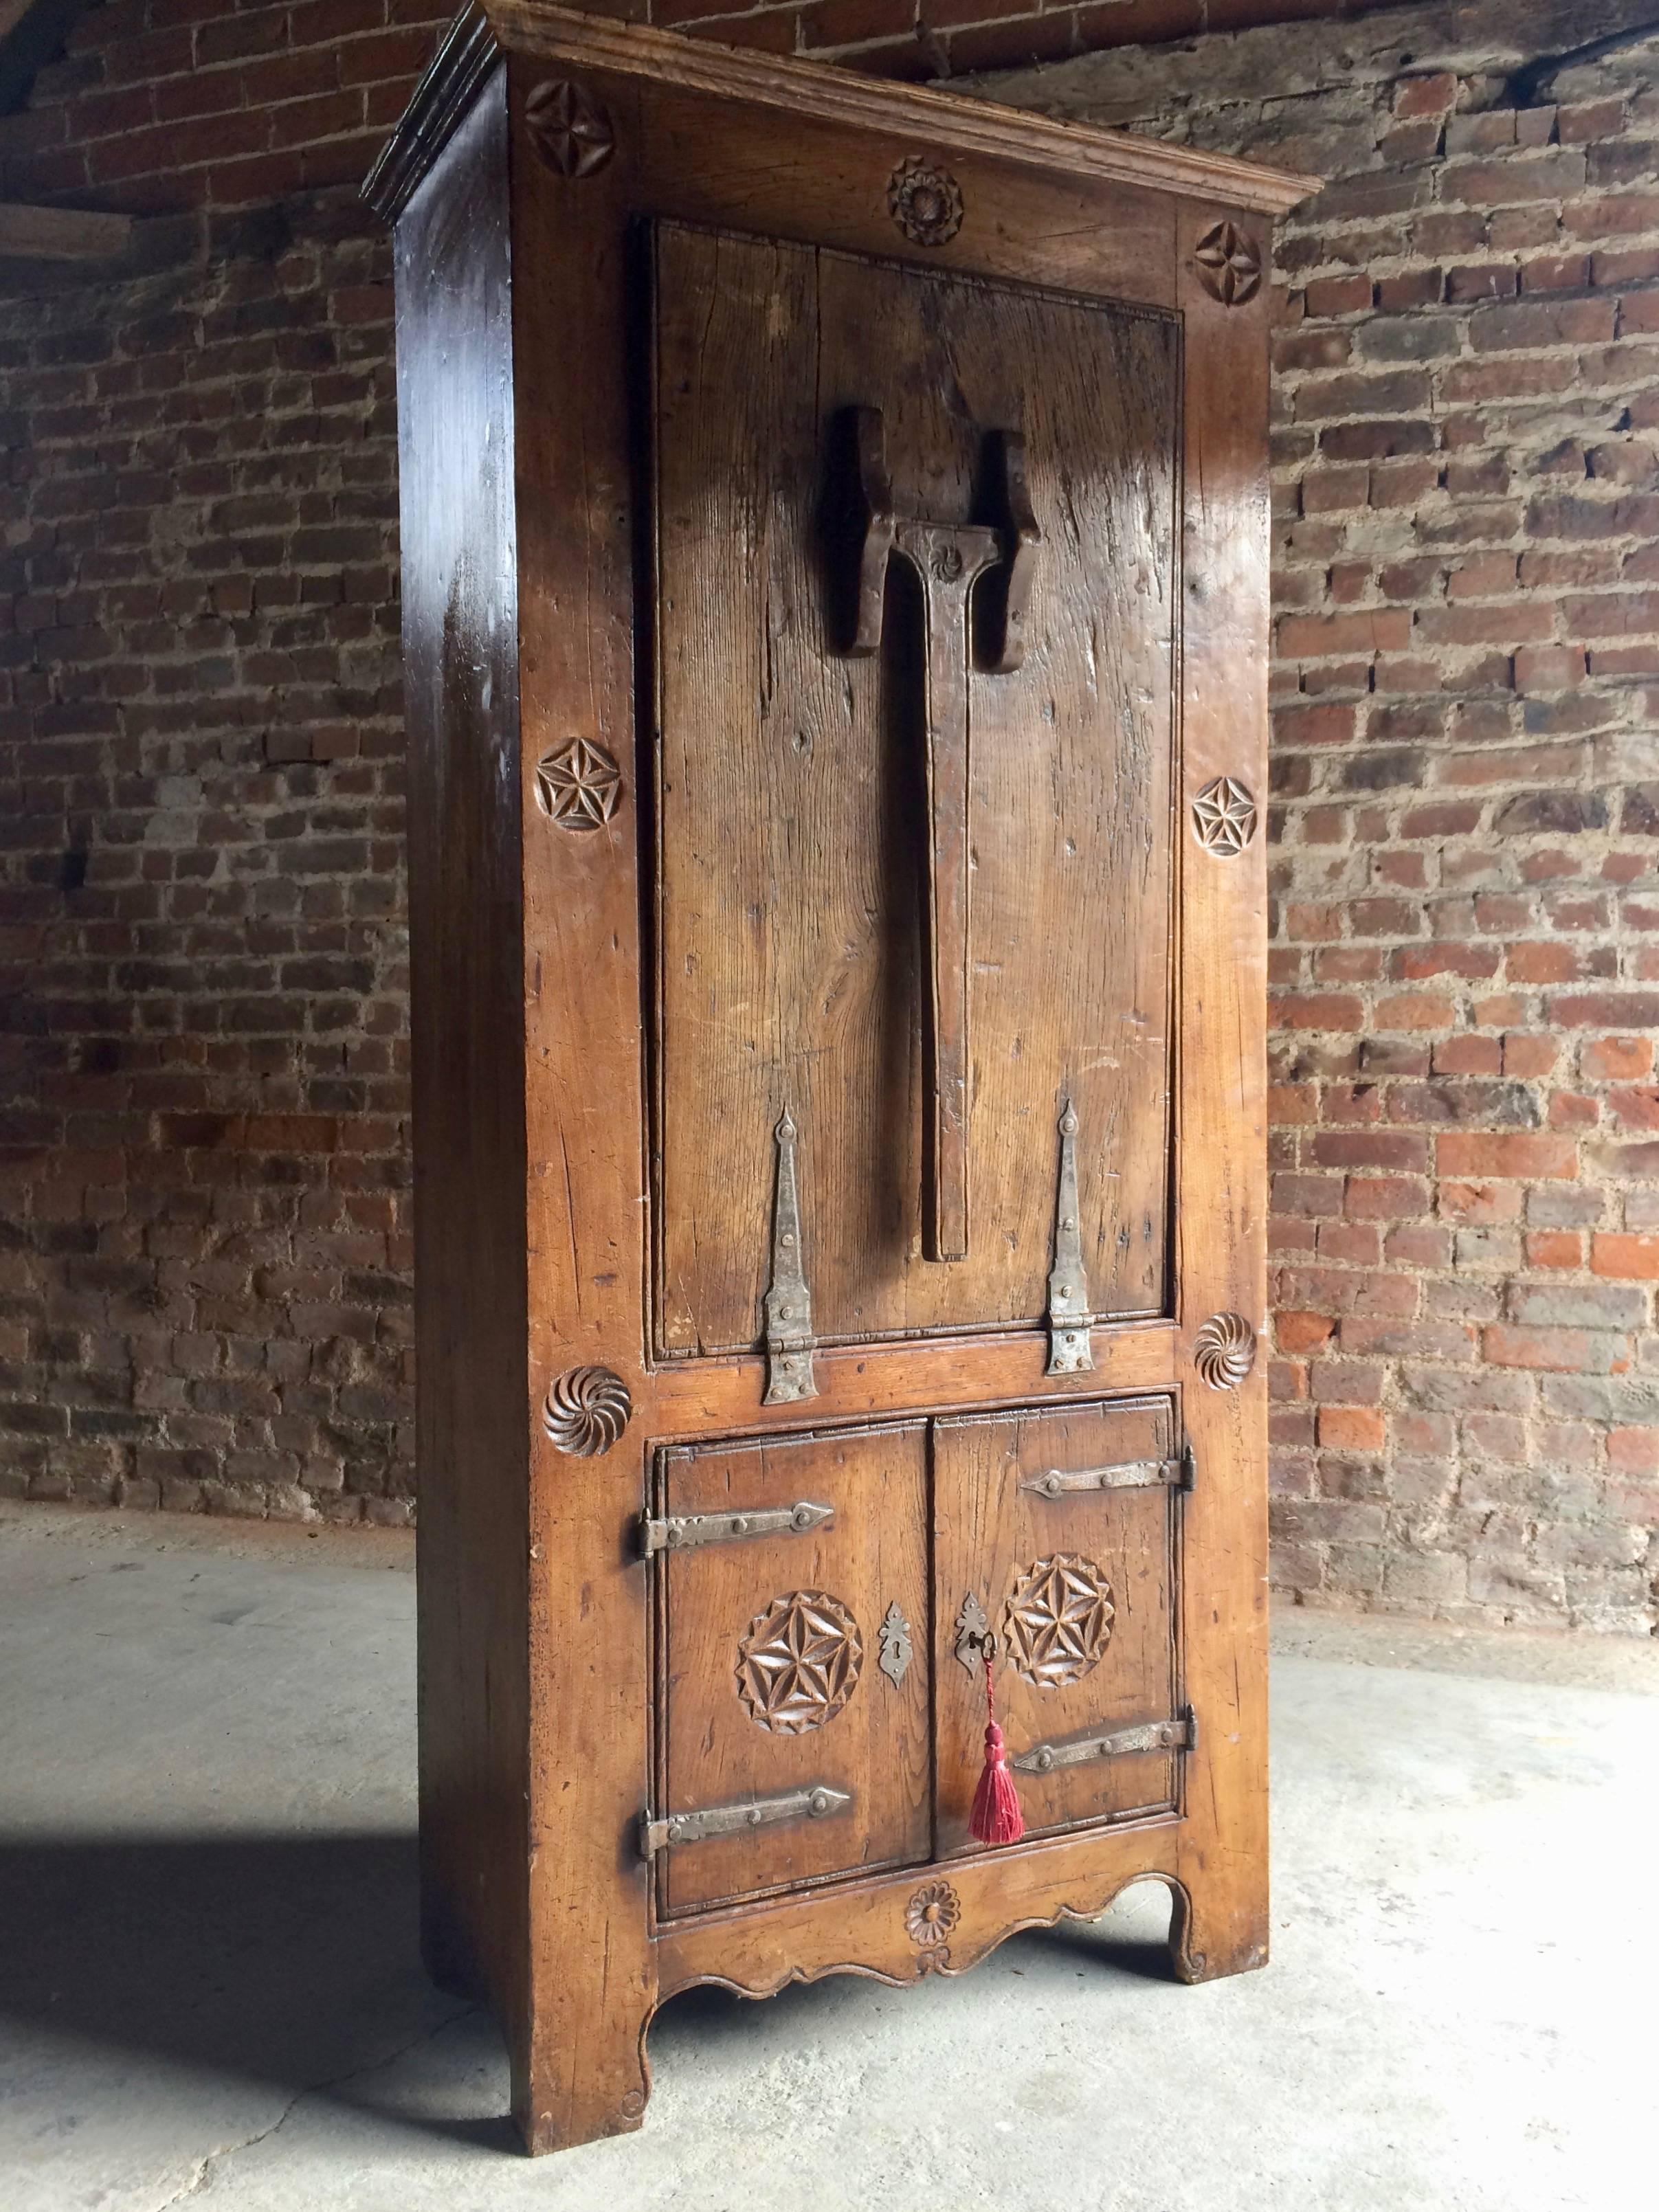 Rare 16th century Dutch solid oak cupboard featuring a drop-down farmhouse table, the corniced top over a single drop down door with original hand forged iron hinges, the door with a single swing down leg that drops down to form a table, two shelves